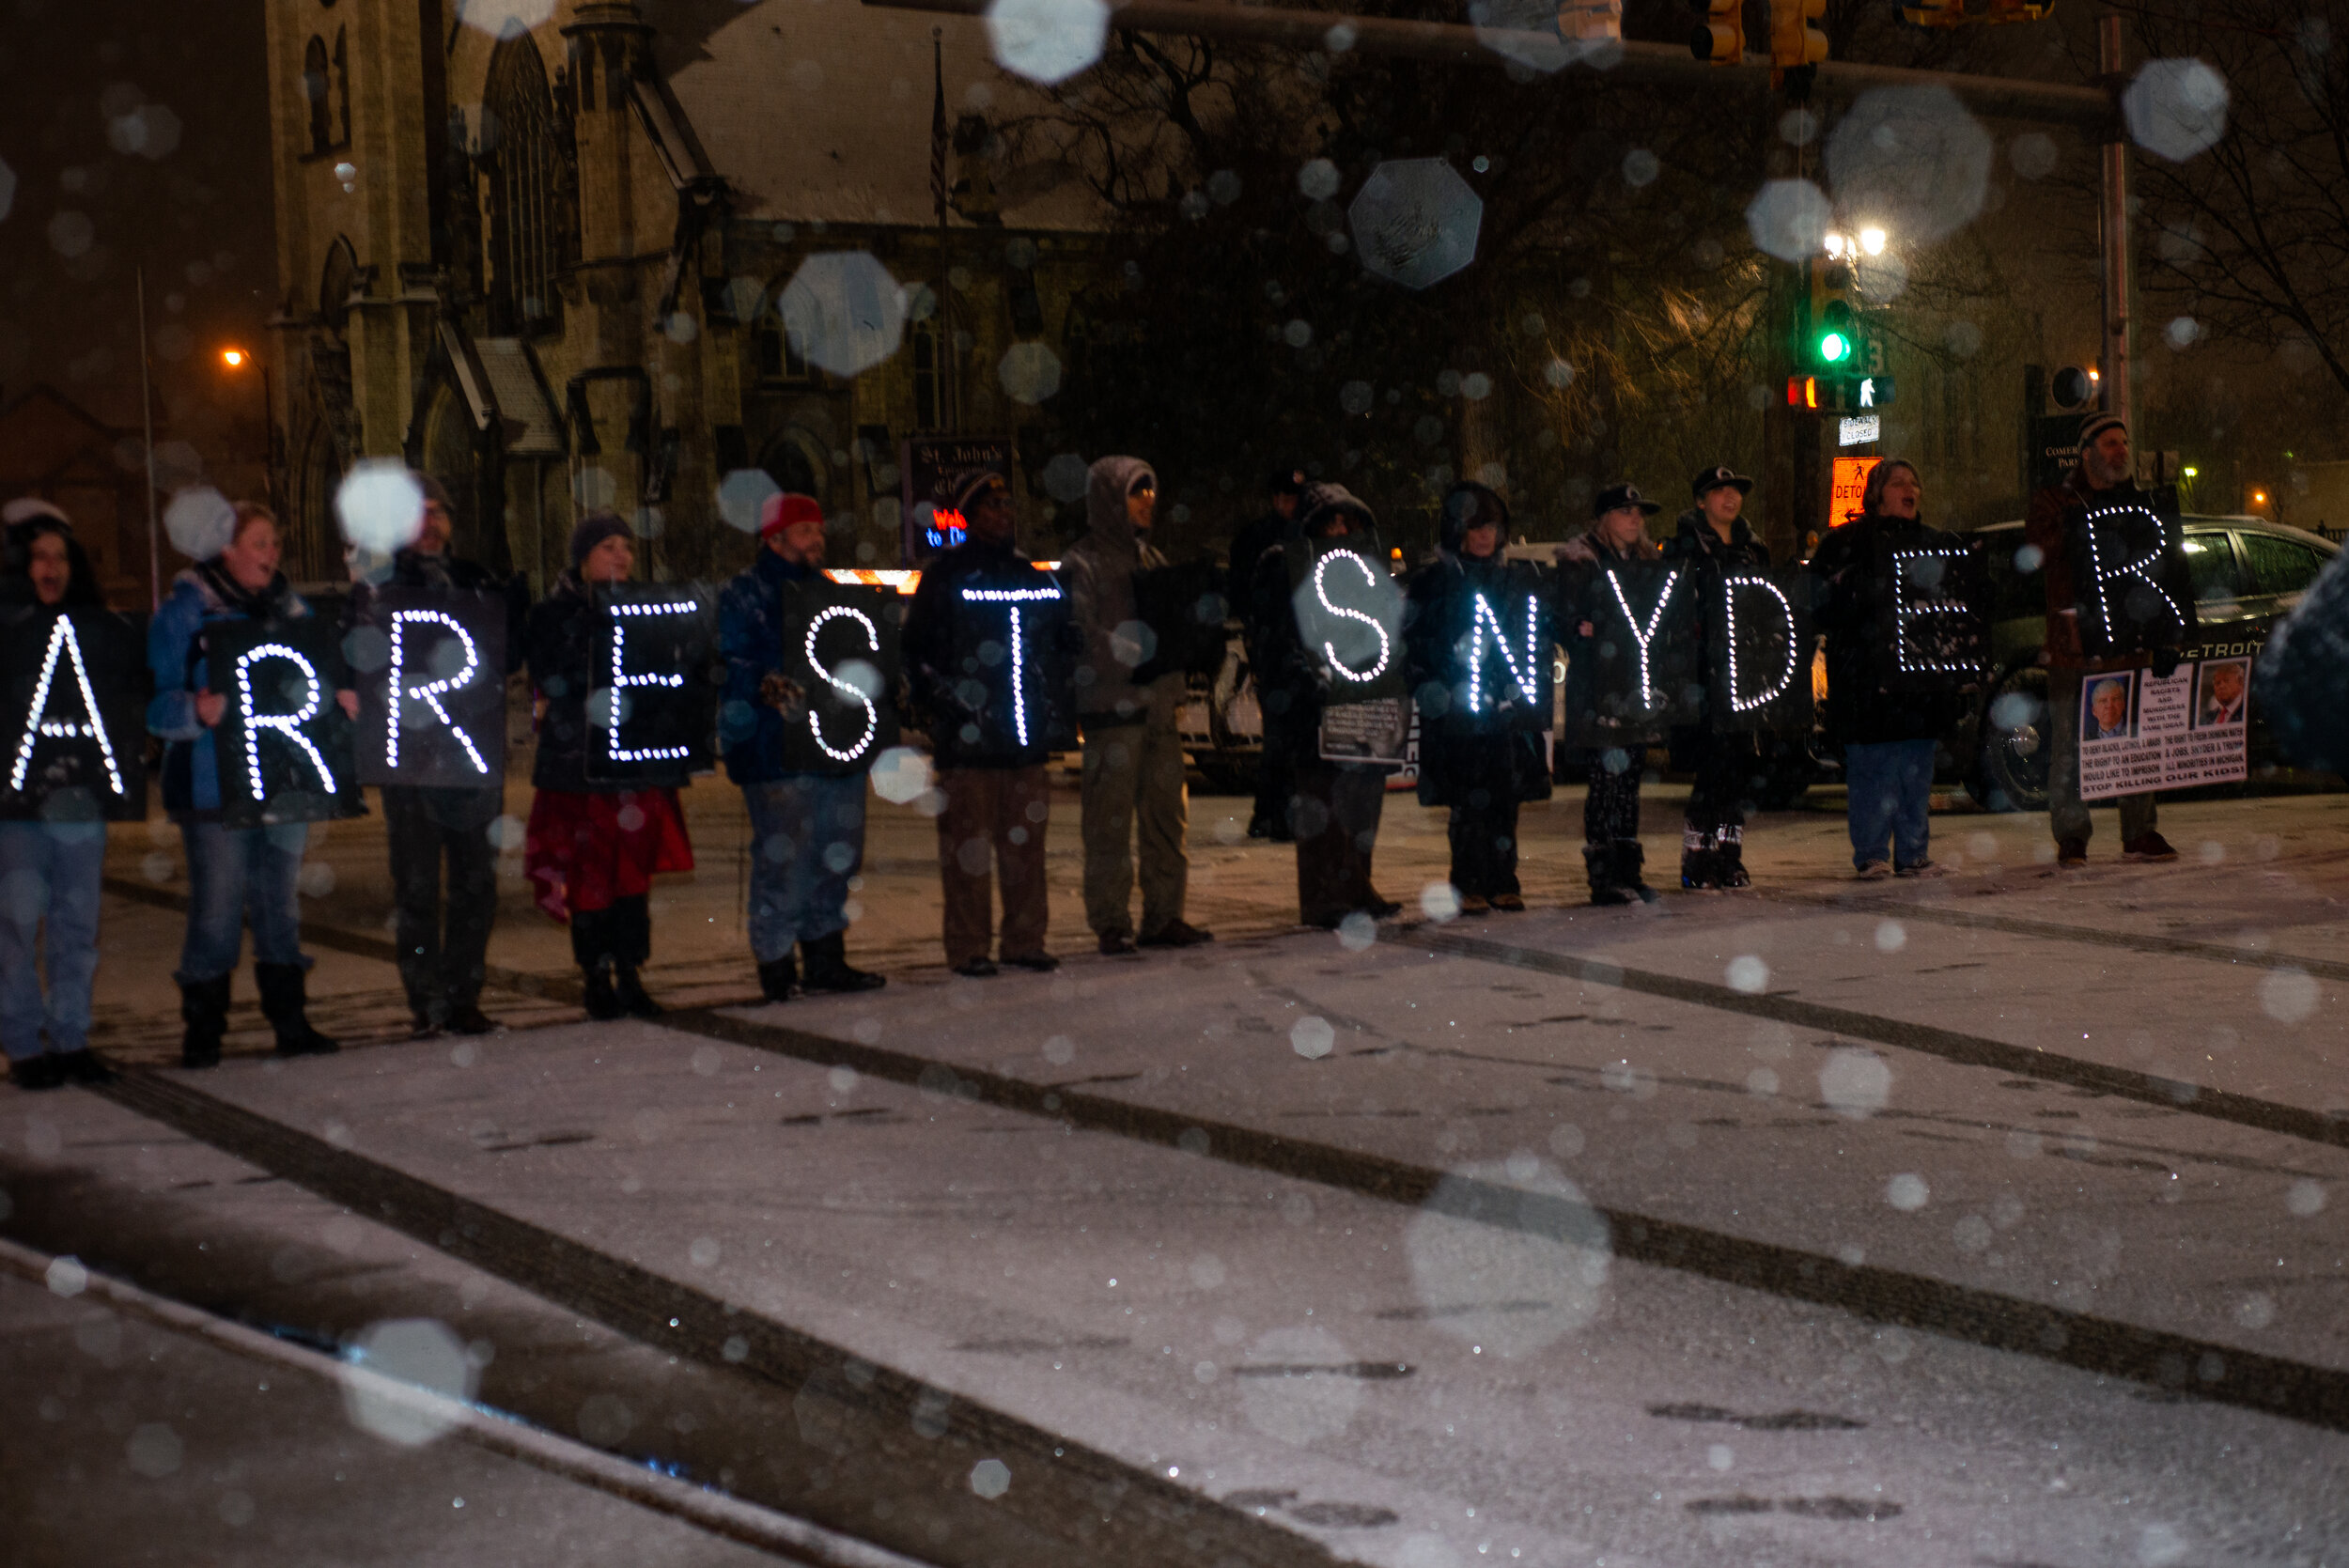  Protesters demanding the arrest and resignation of former Michigan governor RIck Snyder in his involvement with the Flint Water Crisis gather outside of the Republican Presidential at the Fox Theater on March 12, 2016 in Detroit, Michigan. 